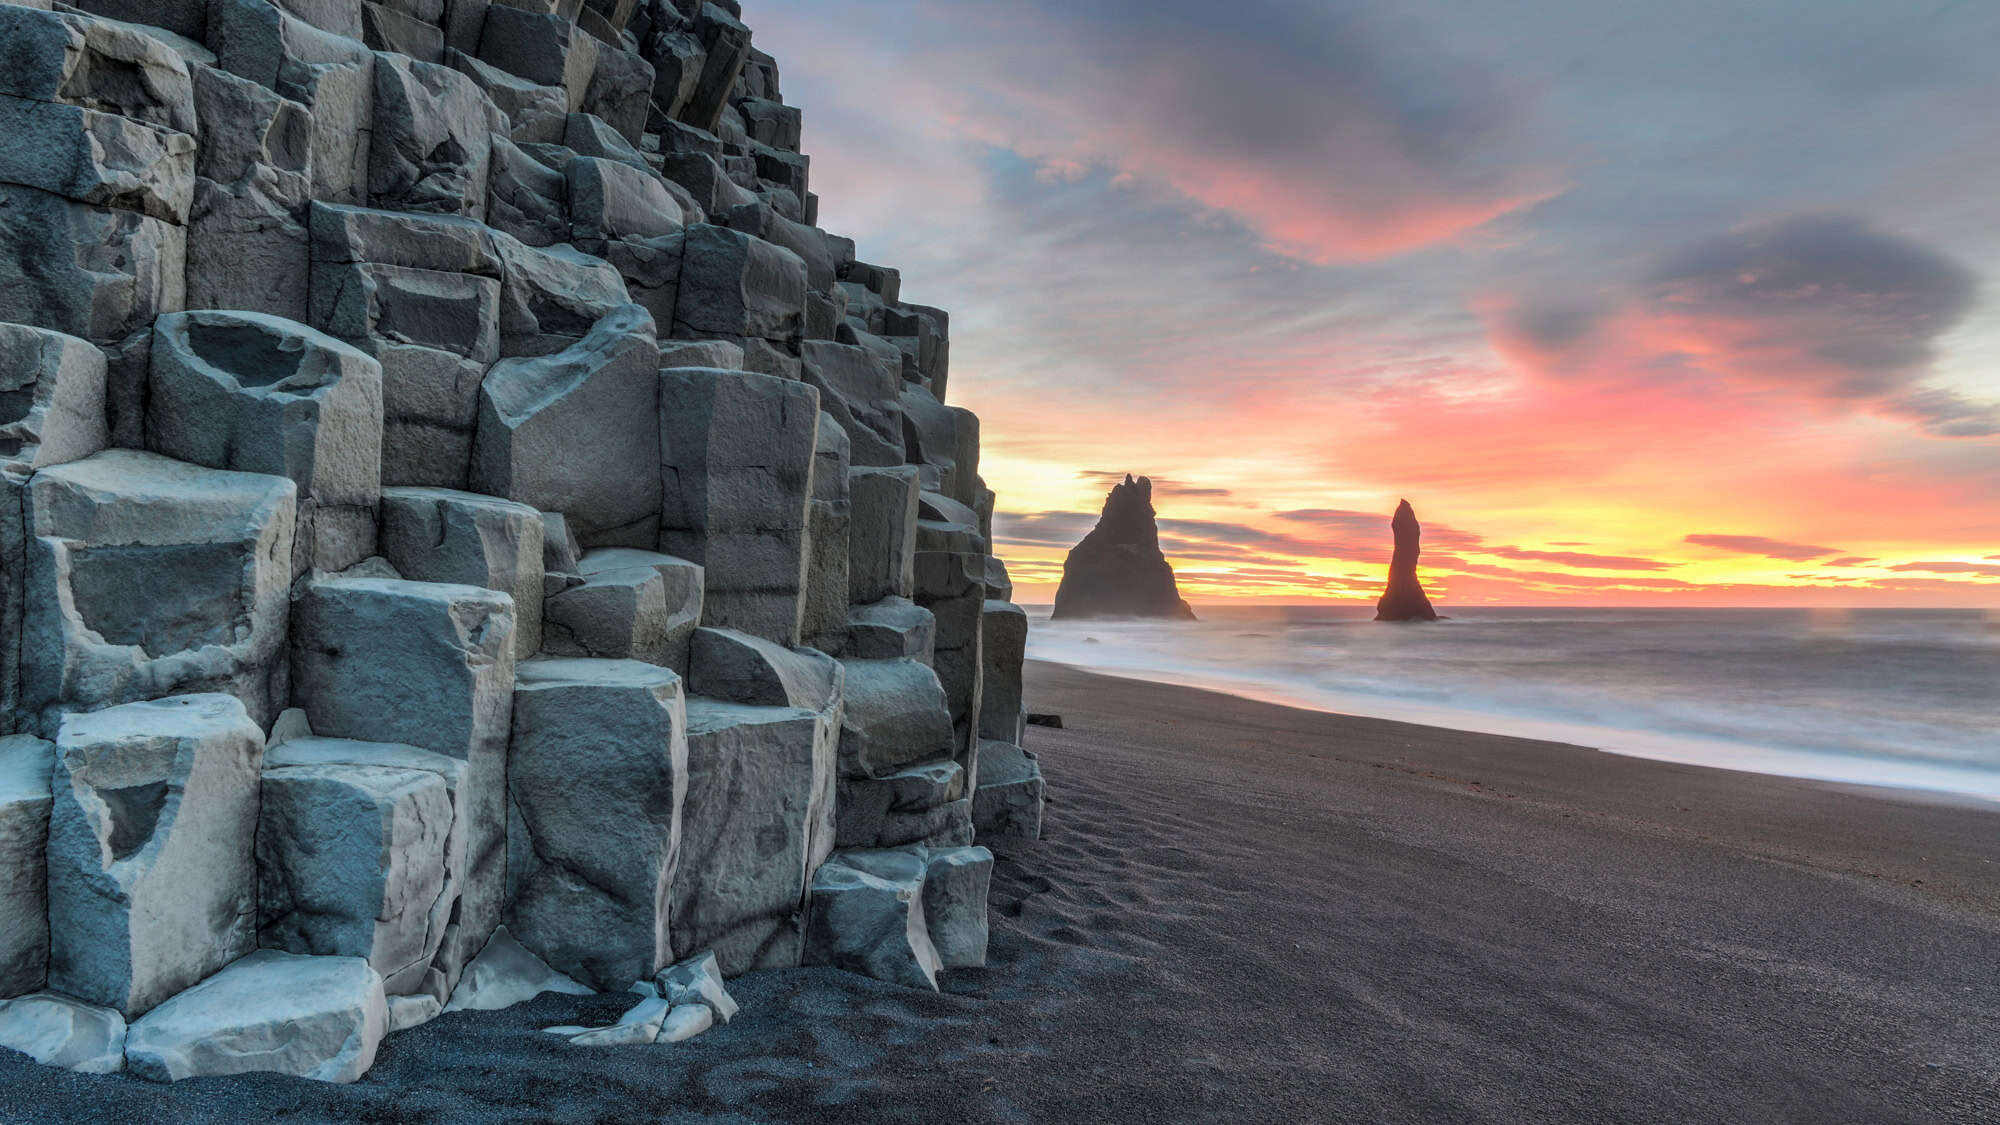 <p>Speaking of black sand beaches, Reynisfjara is the rock star of them all. Famous for its eerie basalt columns that look like nature’s very own Lego set, and <strong>waves so powerful they’ll make you rethink that beach picnic</strong>. This place will blow your flip-flops off (<em>literally, if you aren’t careful!</em>). </p> <p>Keep an eye on the tide while you’re at it—those waves aren’t messing around (seriously, they advise against swimming as you can be swept out to sea). And getting soaked by an Icelandic wave is not the kind of surprise you want in your travel diary. Take your pics fast and run for cover!</p> <div class="wp-block-kadence-iconlist kt-svg-icon-list-items kt-svg-icon-list-items4232_51f27f-9d kt-svg-icon-list-columns-1 alignnone"> <ul class="kt-svg-icon-list"> <li class="wp-block-kadence-listitem kt-svg-icon-list-item-wrap kt-svg-icon-list-item-4232_4b09fc-7c"><span><strong>Best time to visit</strong>: Early morning for the best light and fewer people.</span></li> </ul> </div>